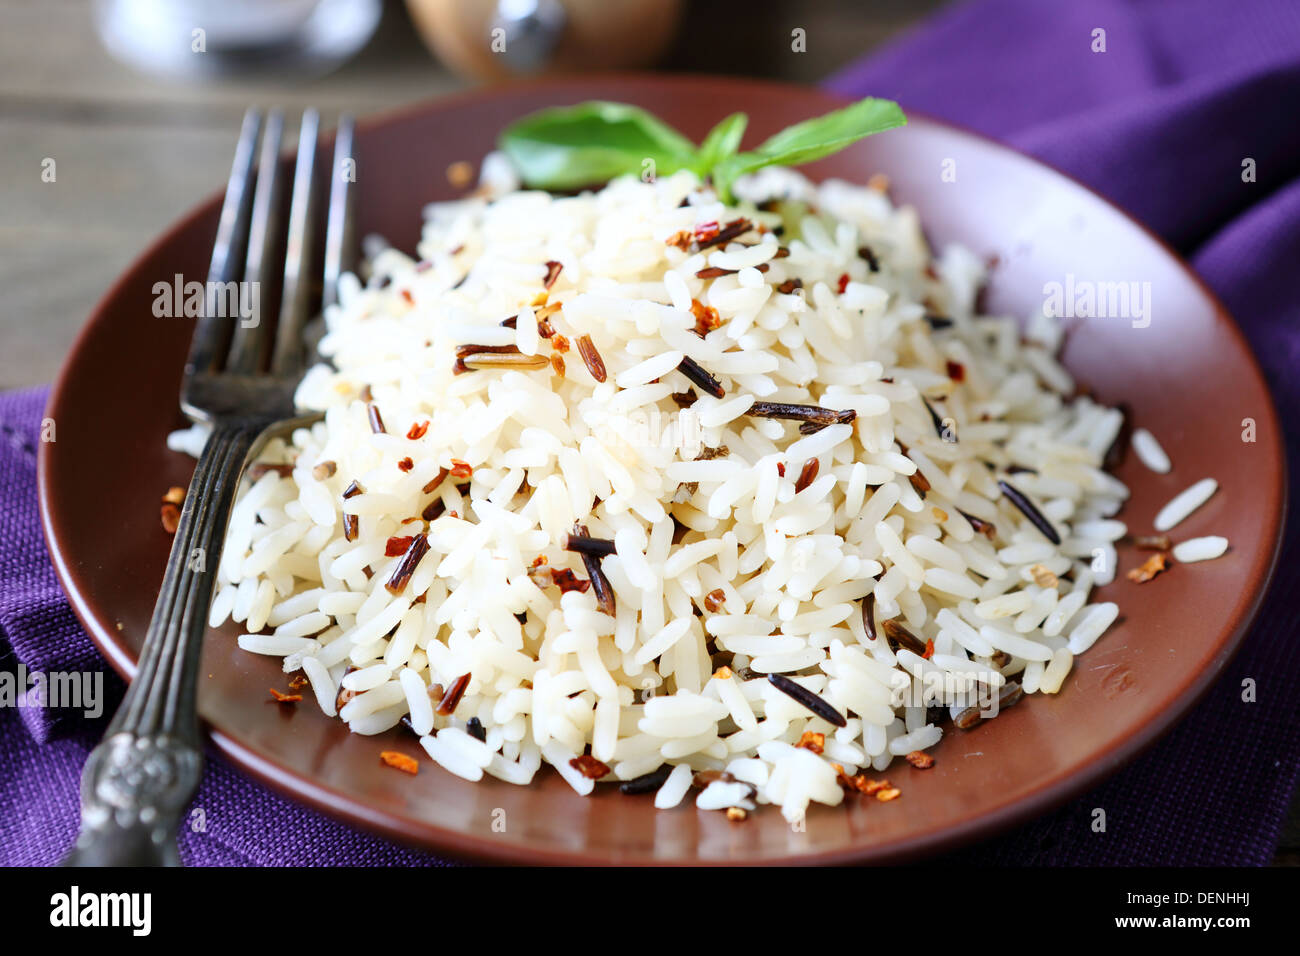 plate full of cooked rice, white and wild, food close up Stock Photo